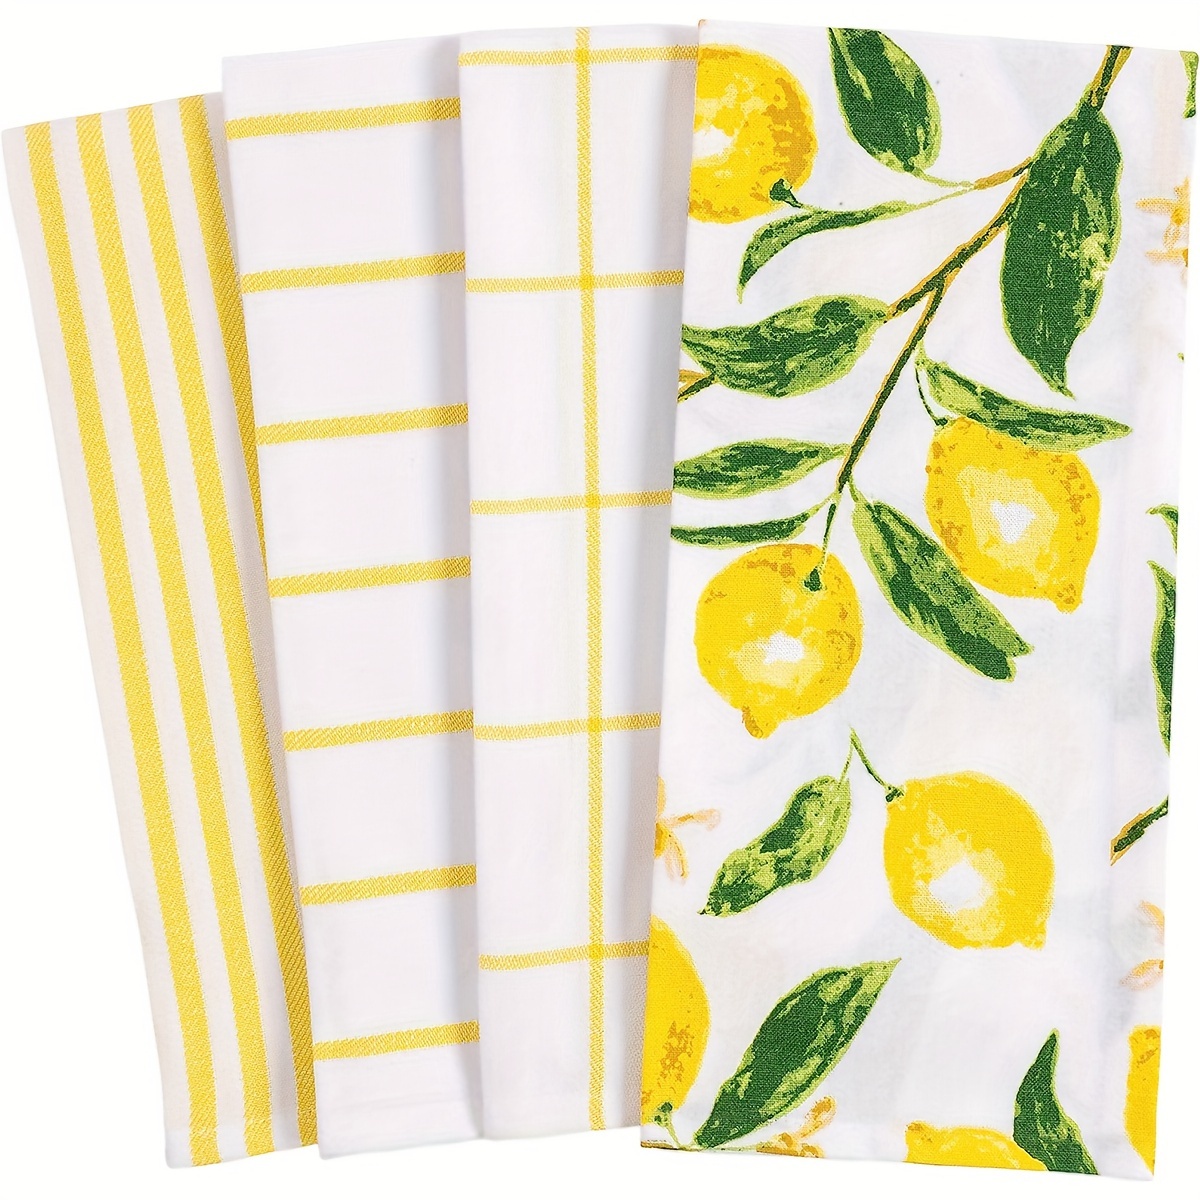 

2/4 Pack Lemon Print Scouring Pad Set, Super Soft, Quick-drying And Absorbent